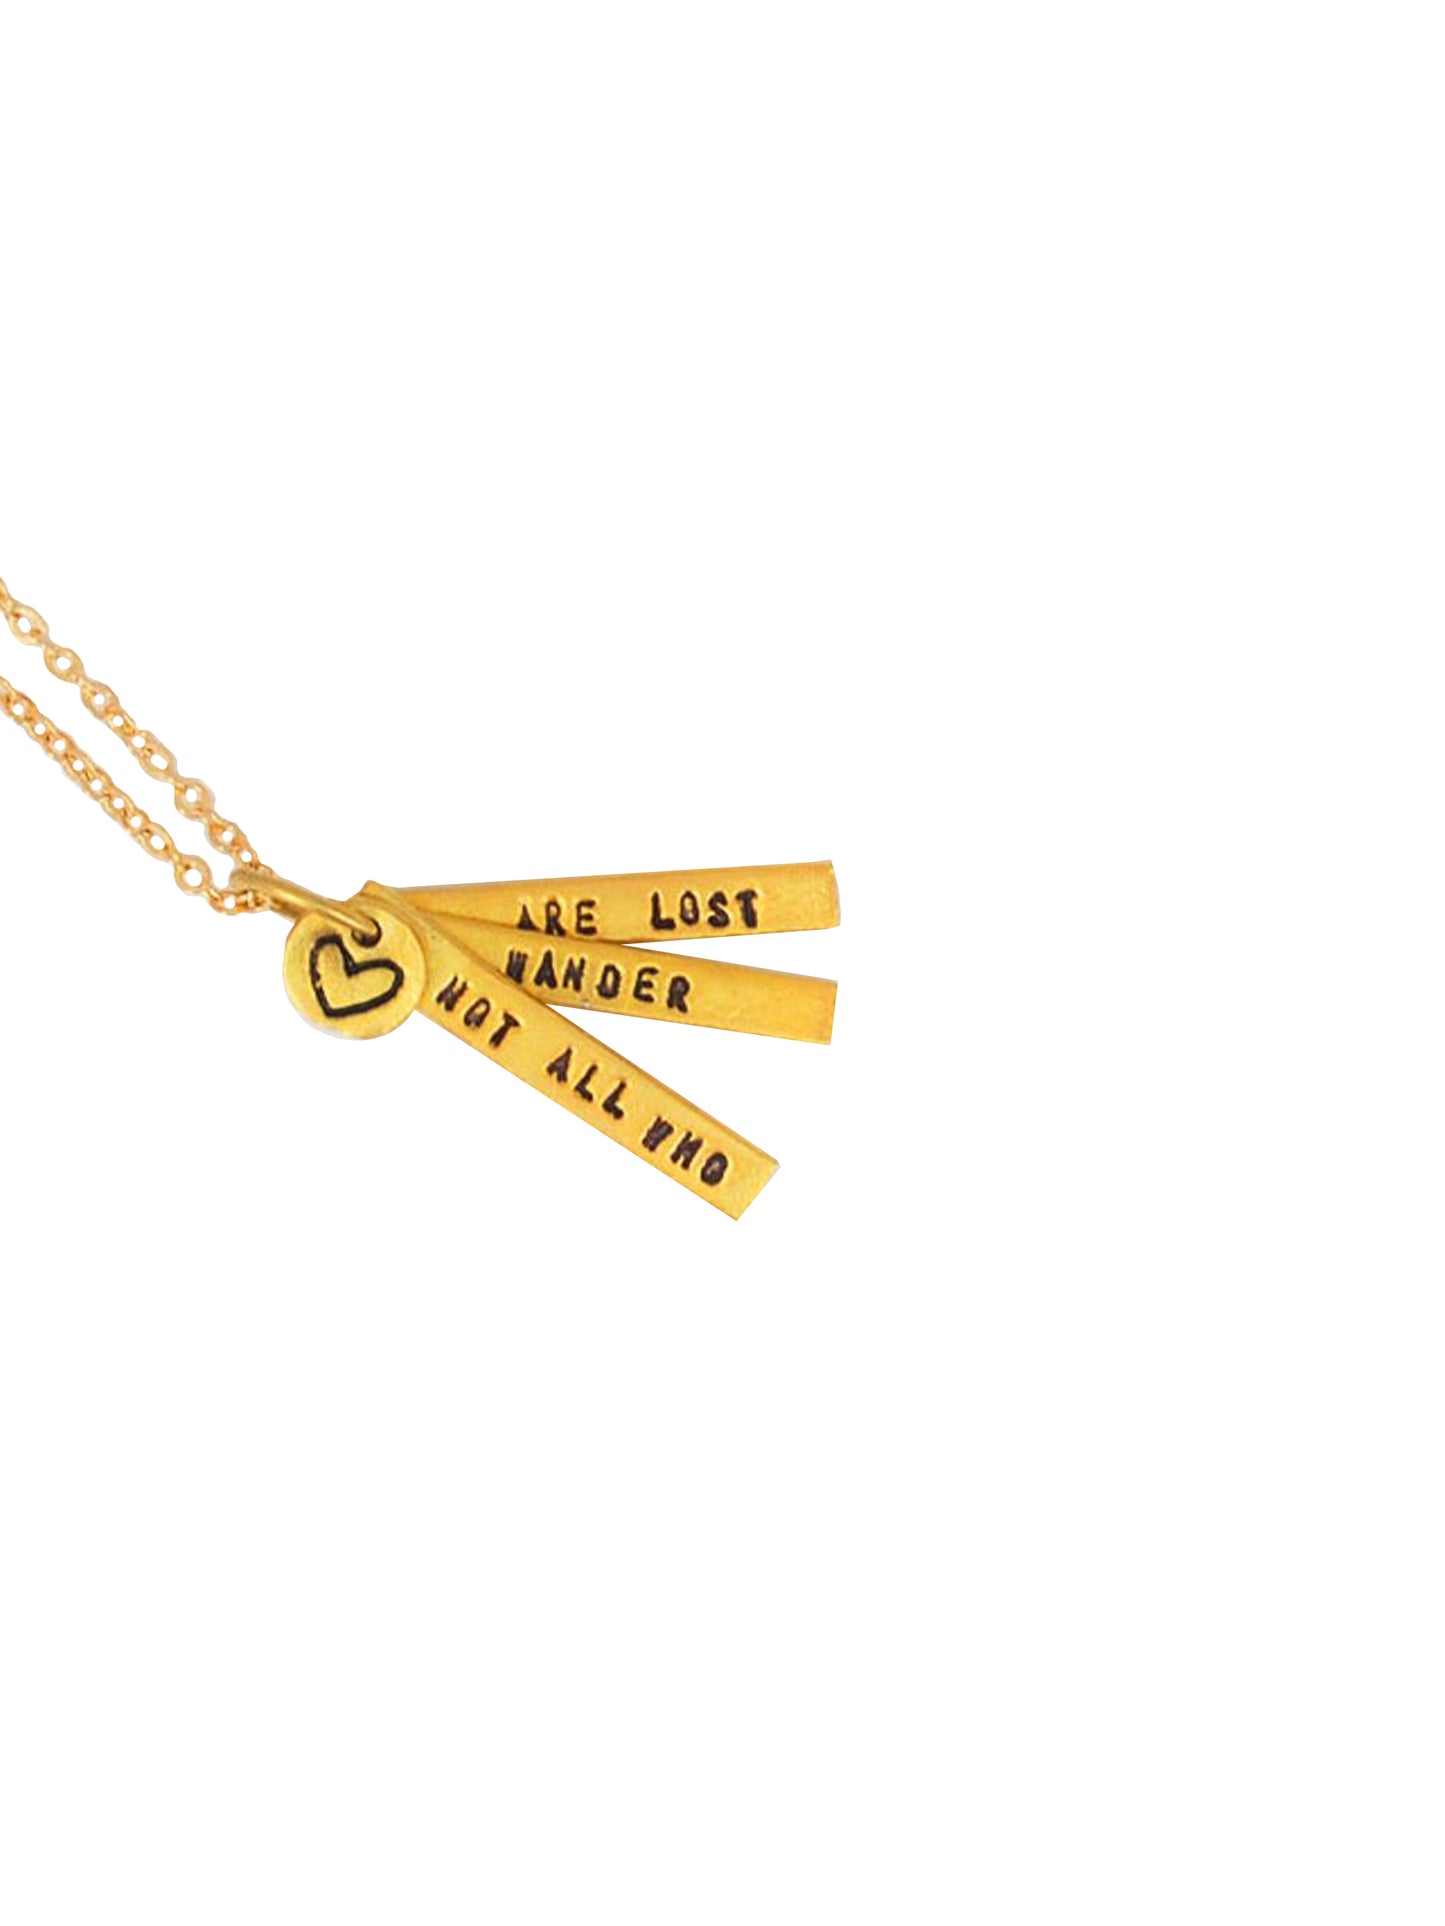 Chocolate & Steel Long-Bar Quote Necklace J.R.R. Tolkien Gold Weston Table